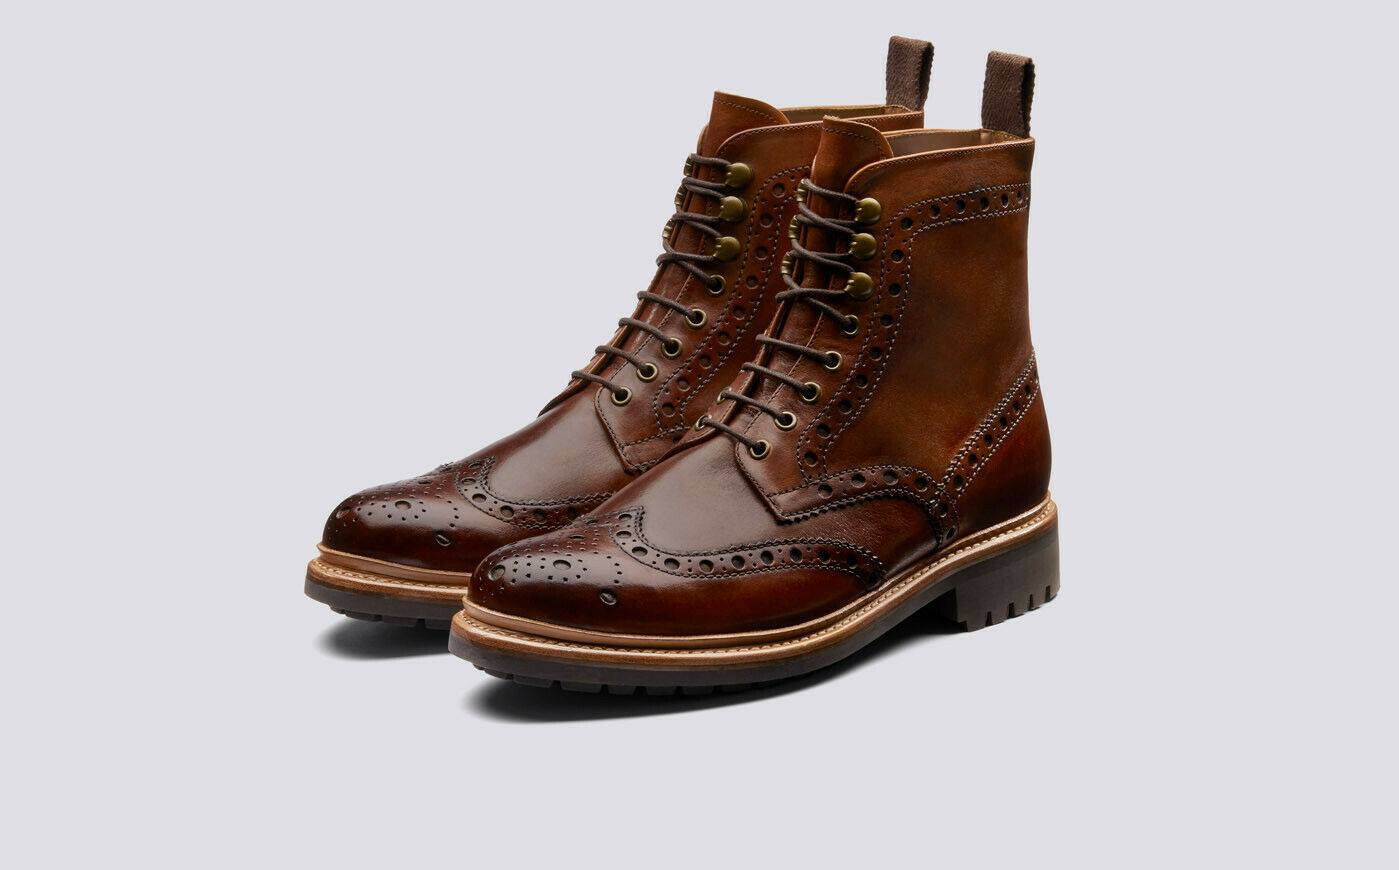 WingTip BroguesToe BrownTone Genuine Leather Oxford Lace Up Men High Ankle Boots